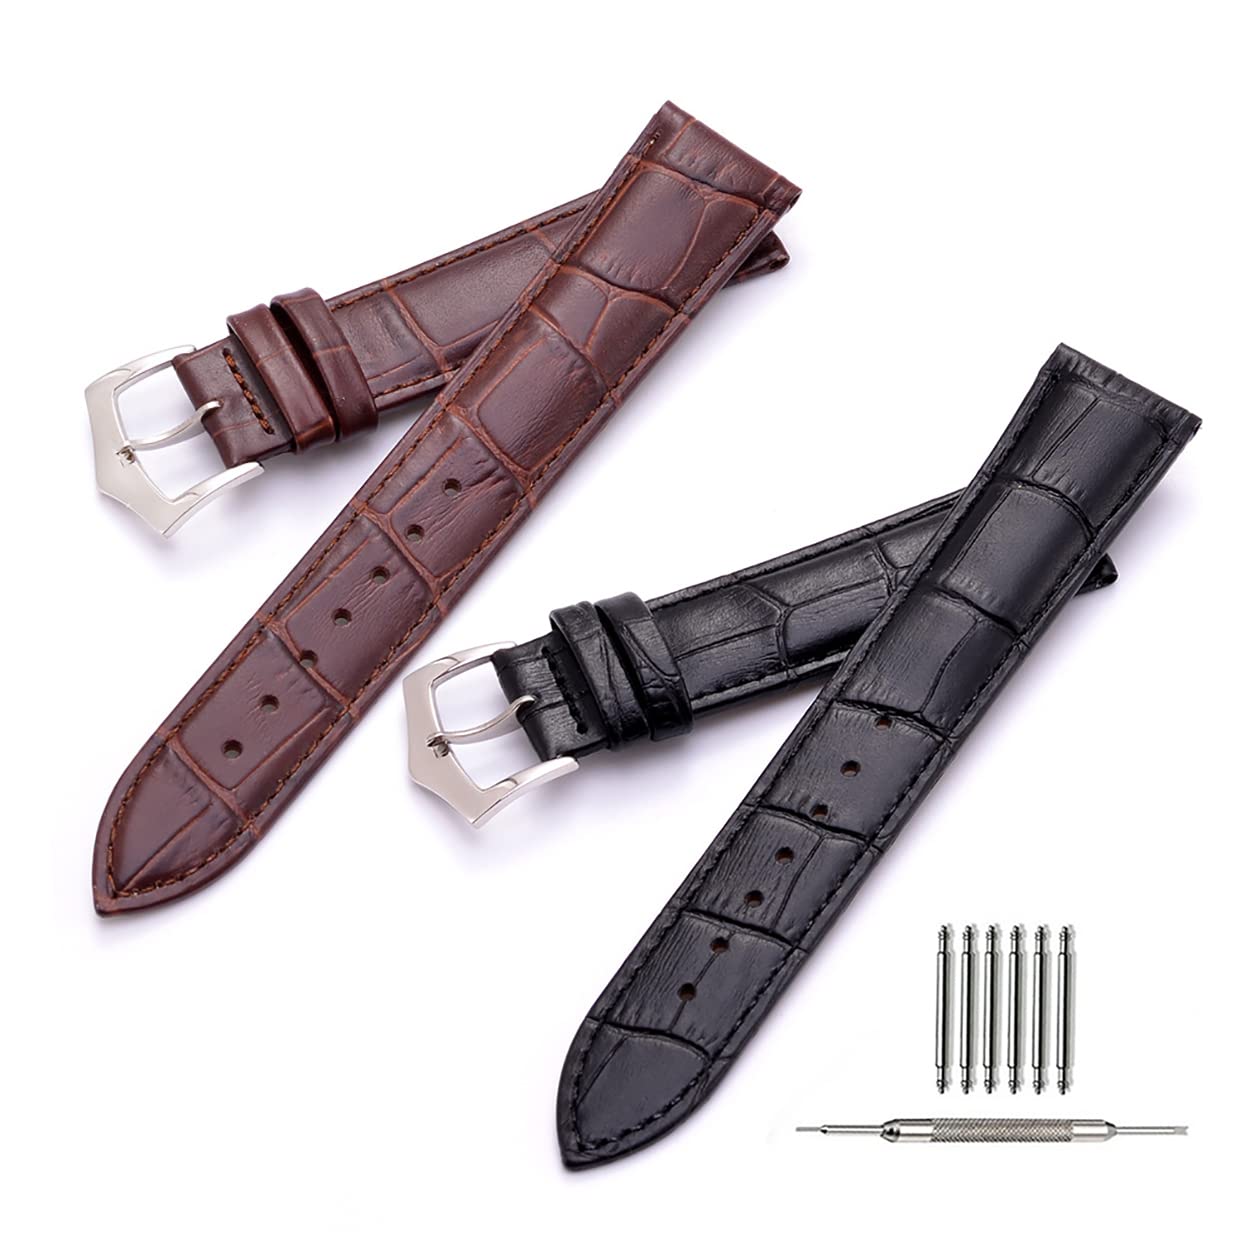 Nice Pies Leather Watch Bands,2 Packs Alligator Grain Calfskin Replacement Watch Straps,18mm 20mm 22mm 24mm Black and Brown Classical Wristbands for Men Women